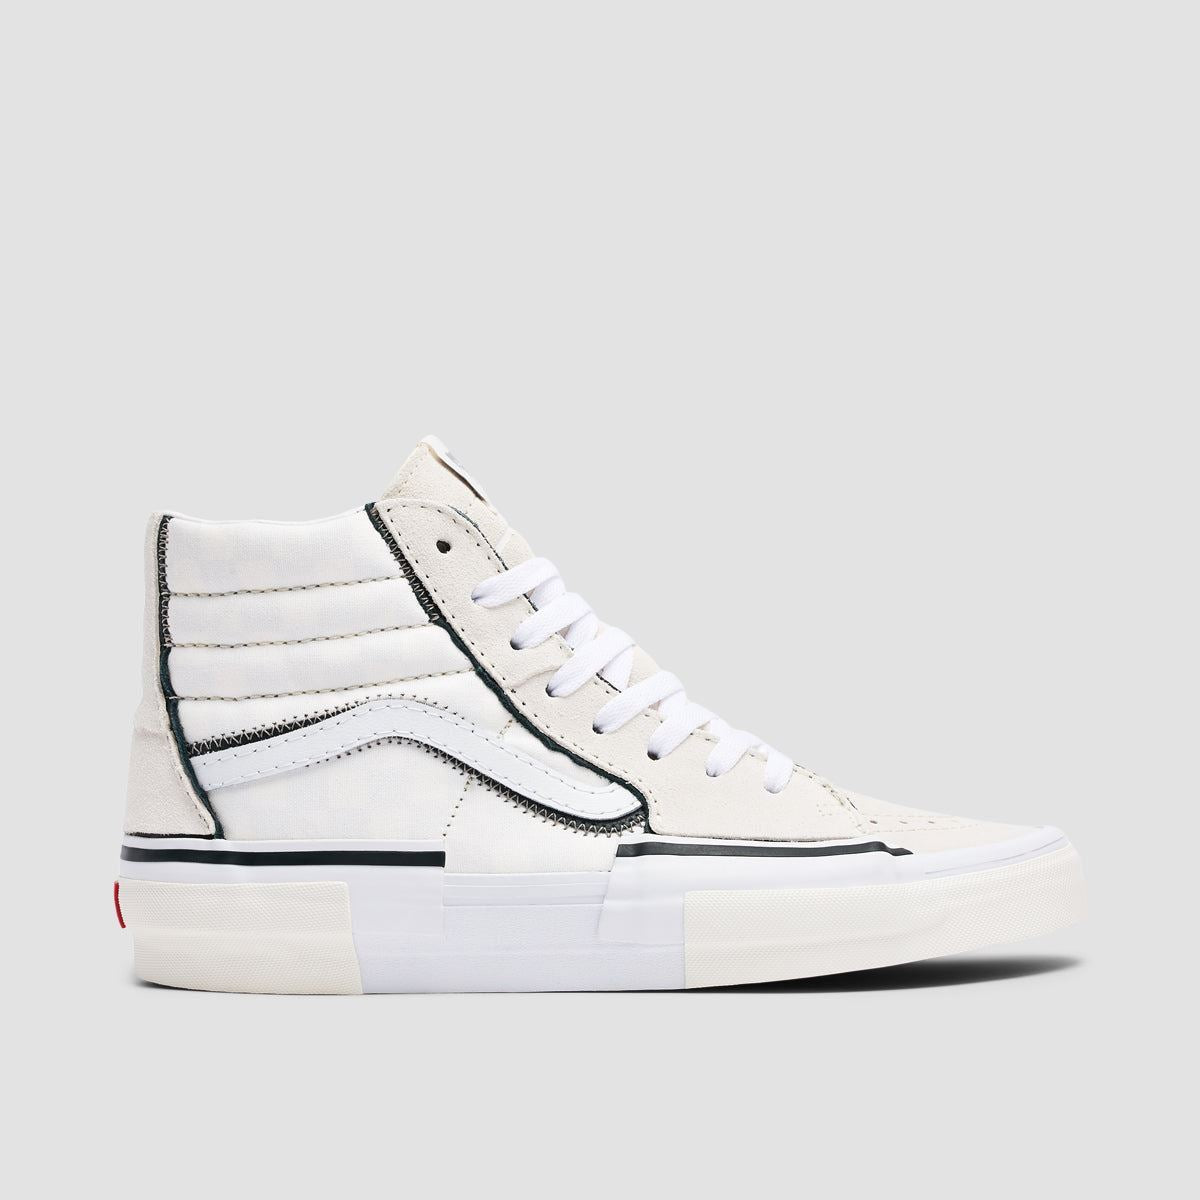 Vans Sk8-Hi Reconstruct High Top Shoes - Marshmallow/White